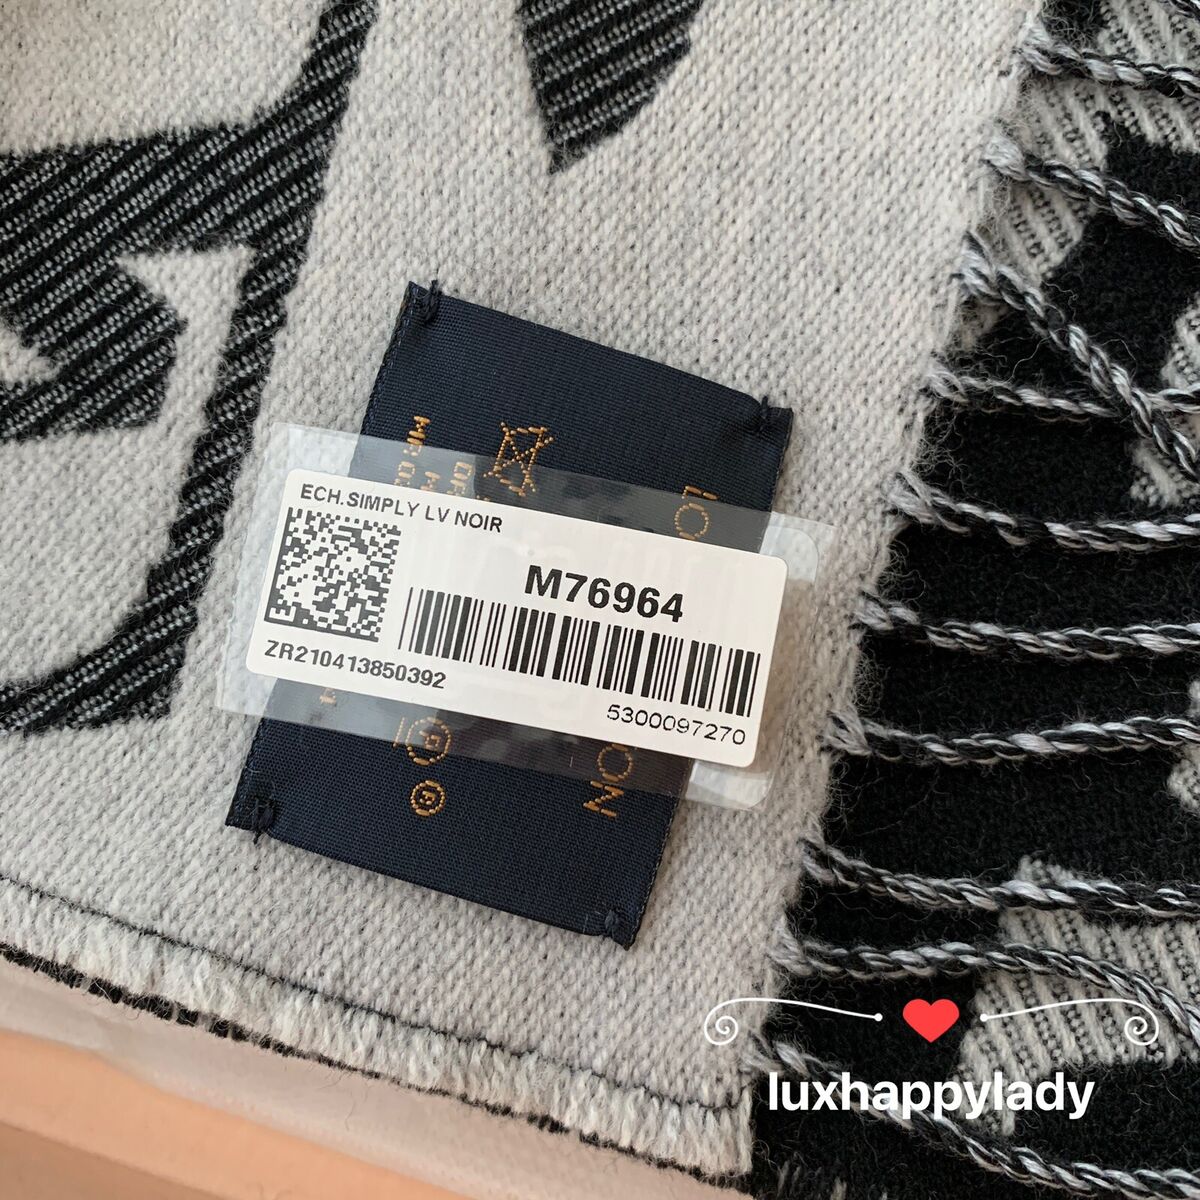 🔥NEW LOUIS VUITTON SIMPLY LV SCARF SHAWL WRAP 100% WOOL- Black ✨HOT  GIFT❤️RARE!